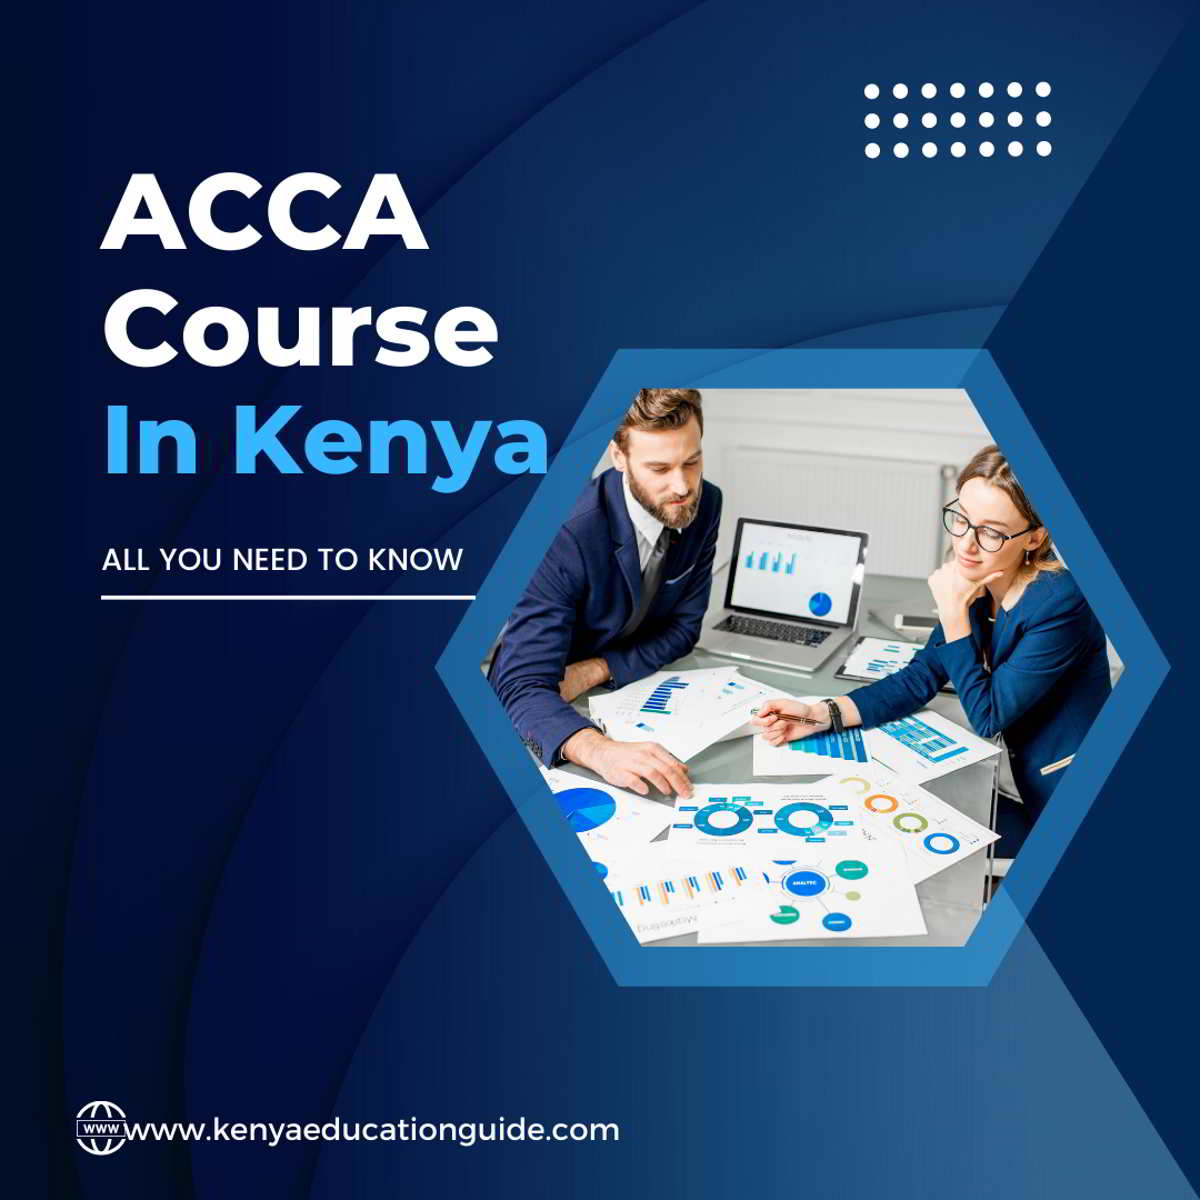 ACCA course in Kenya